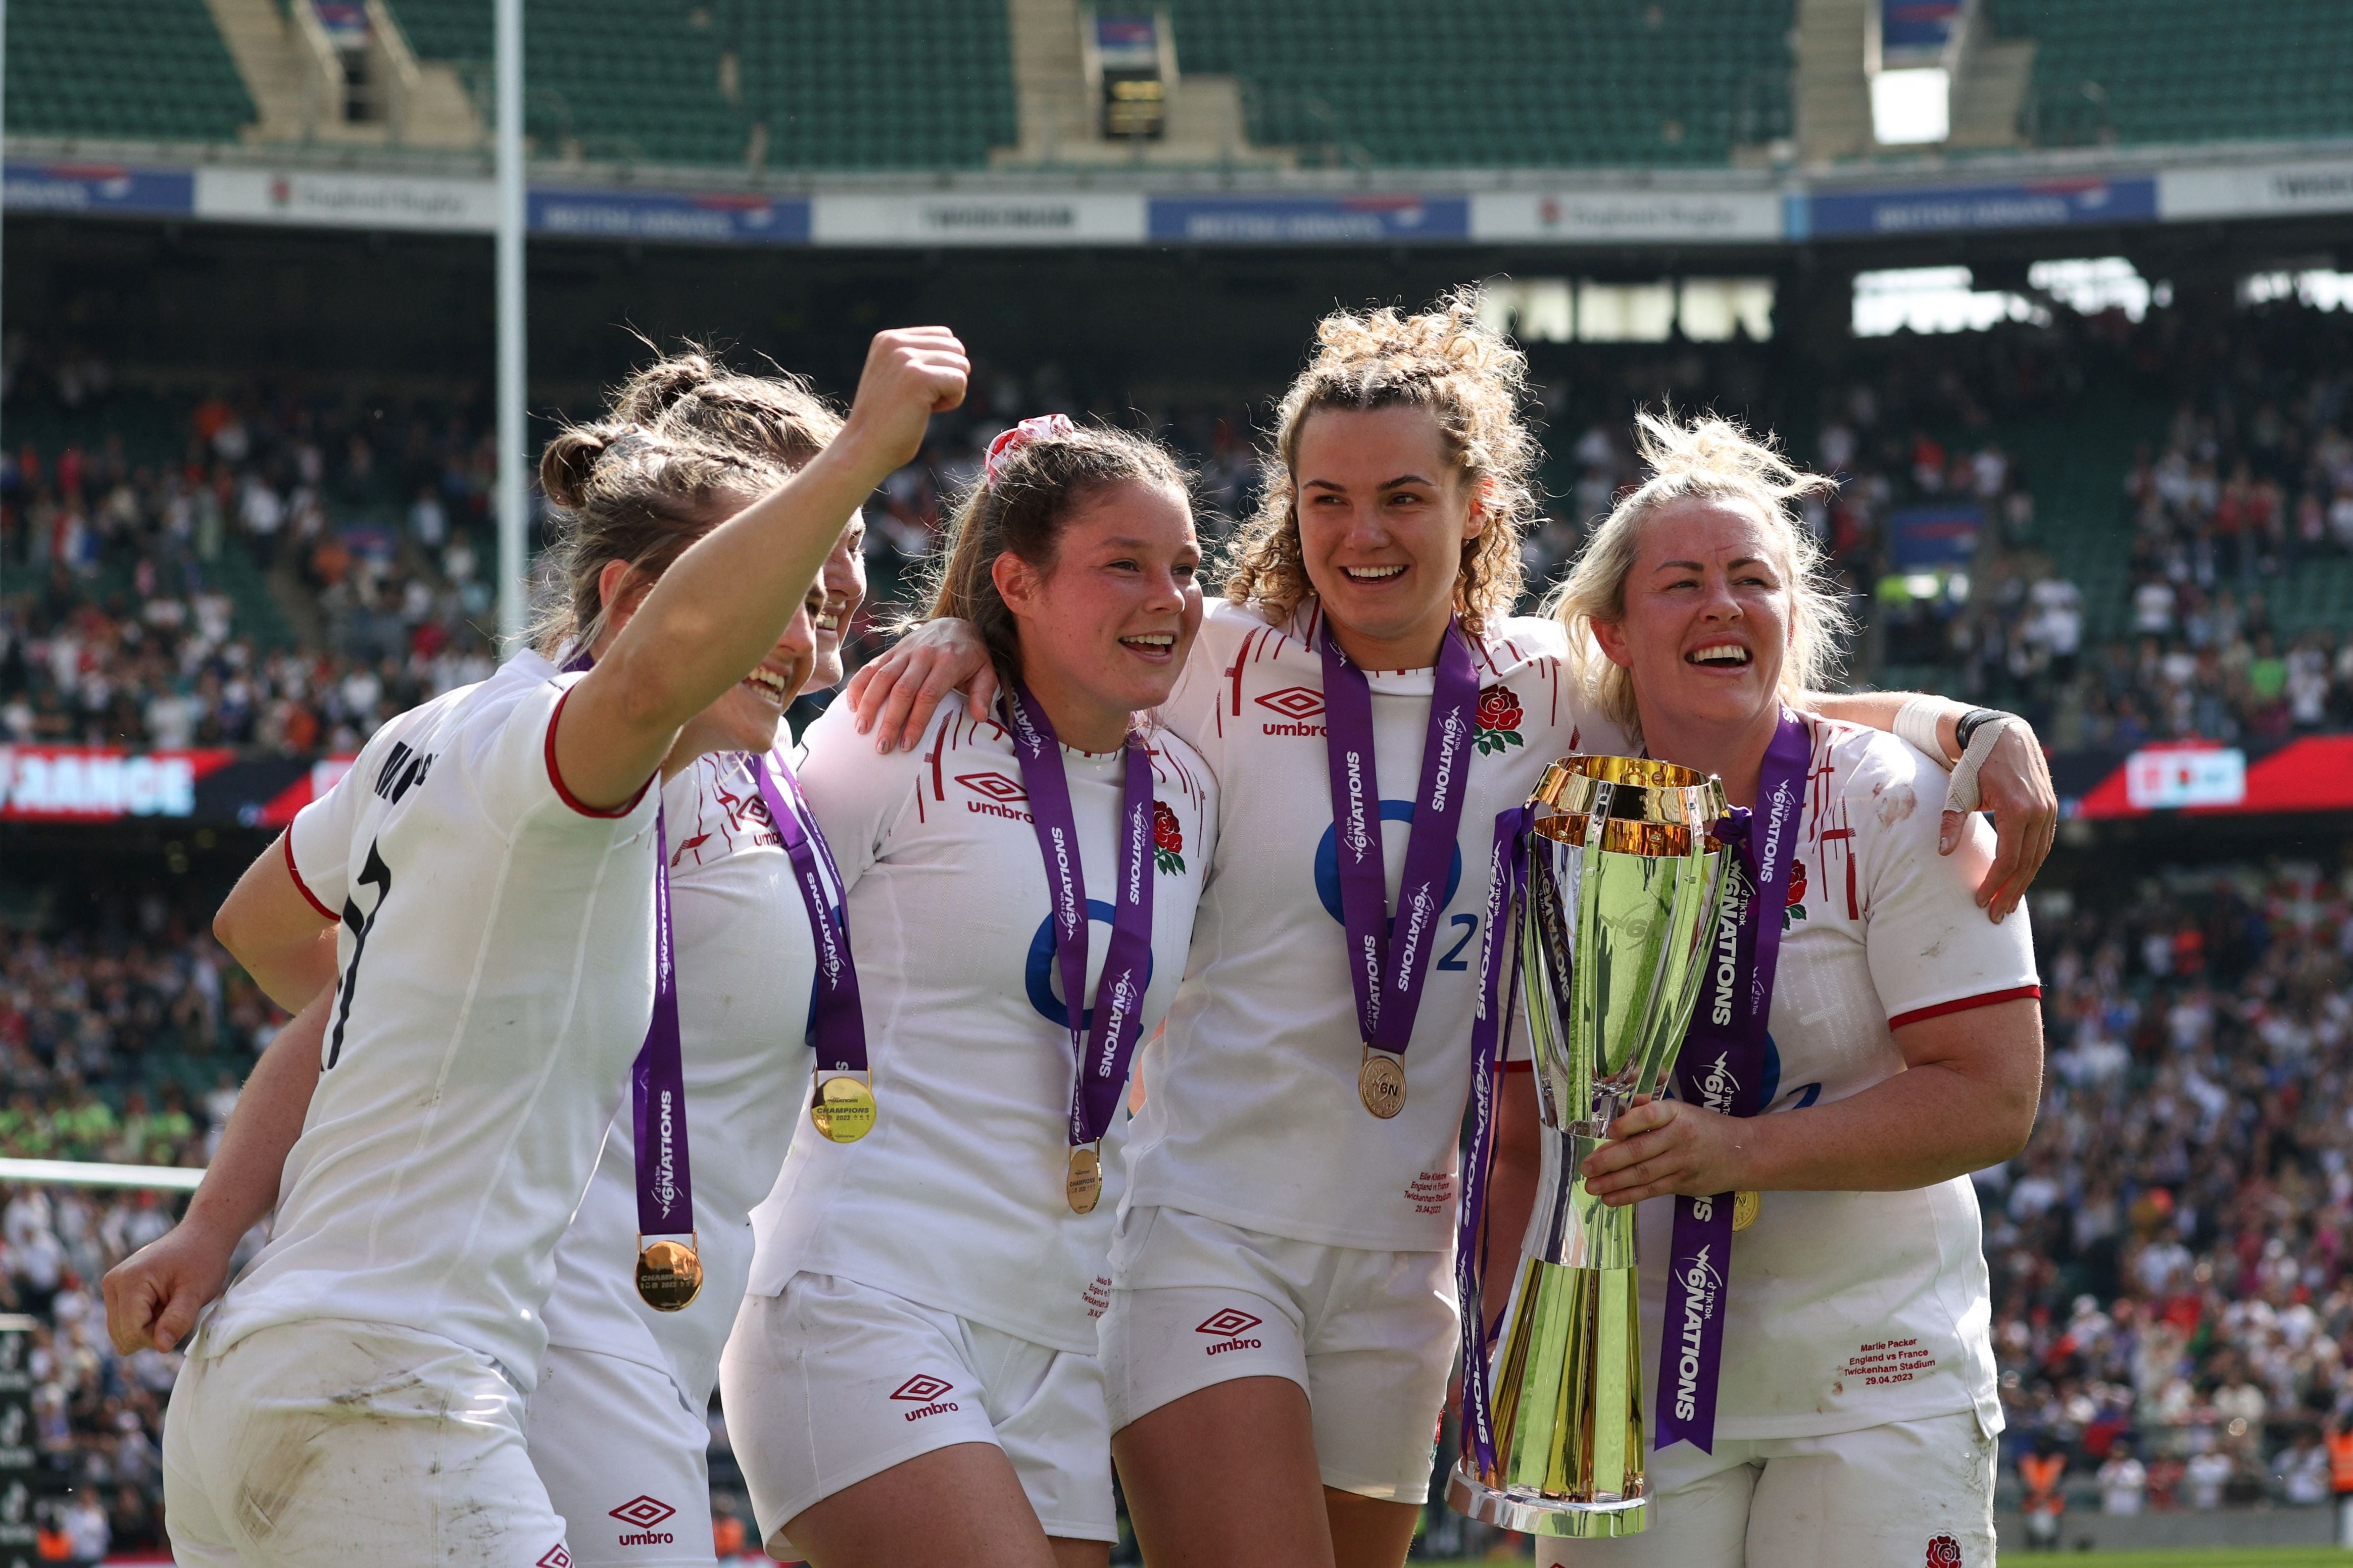 England secured another Women’s Six Nations crown last year